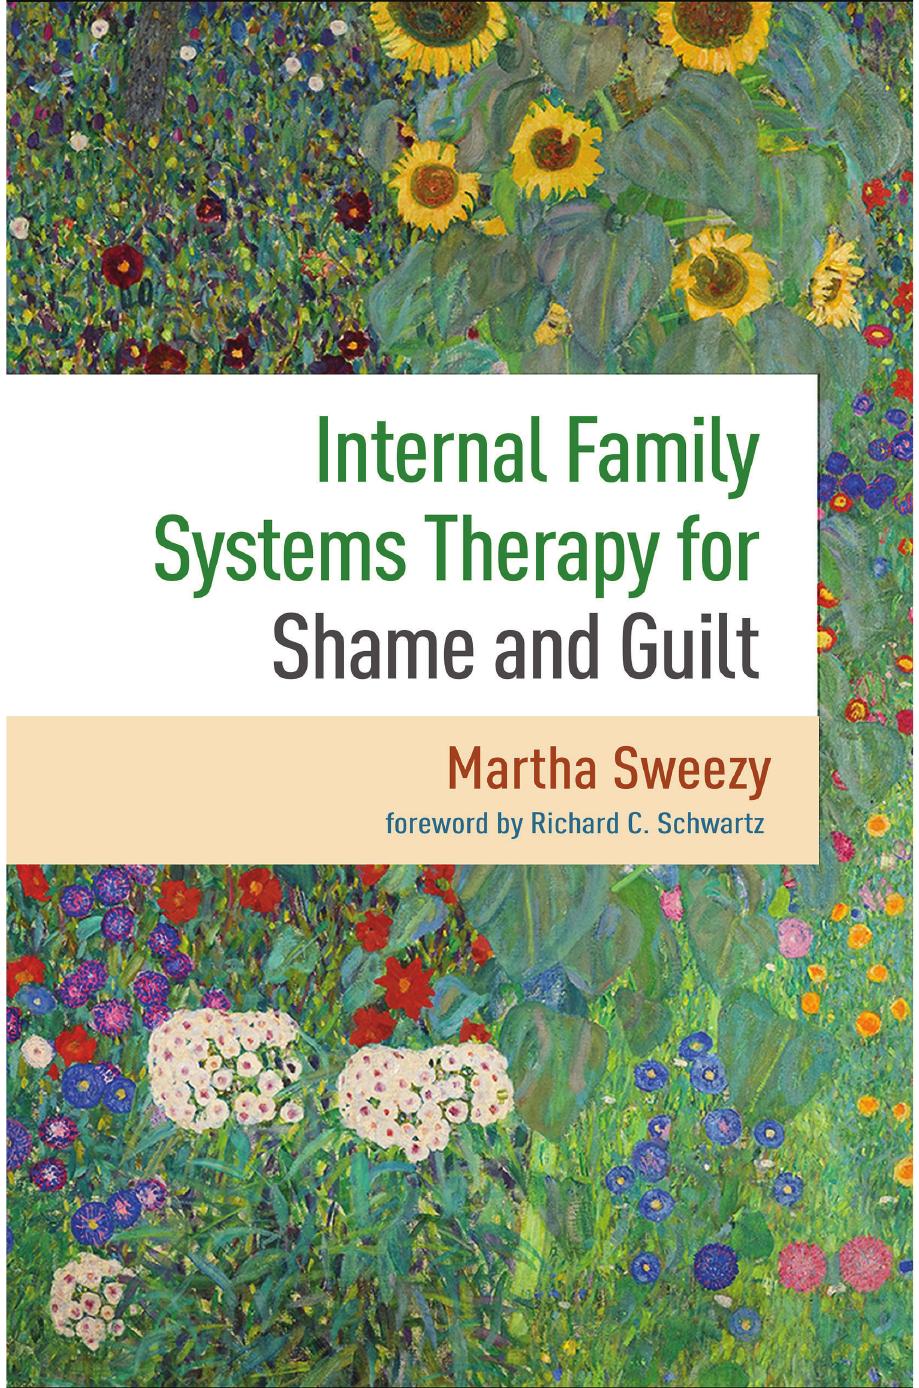 Internal Family Systems Therapy for Shame and Guilt by Martha Sweezy